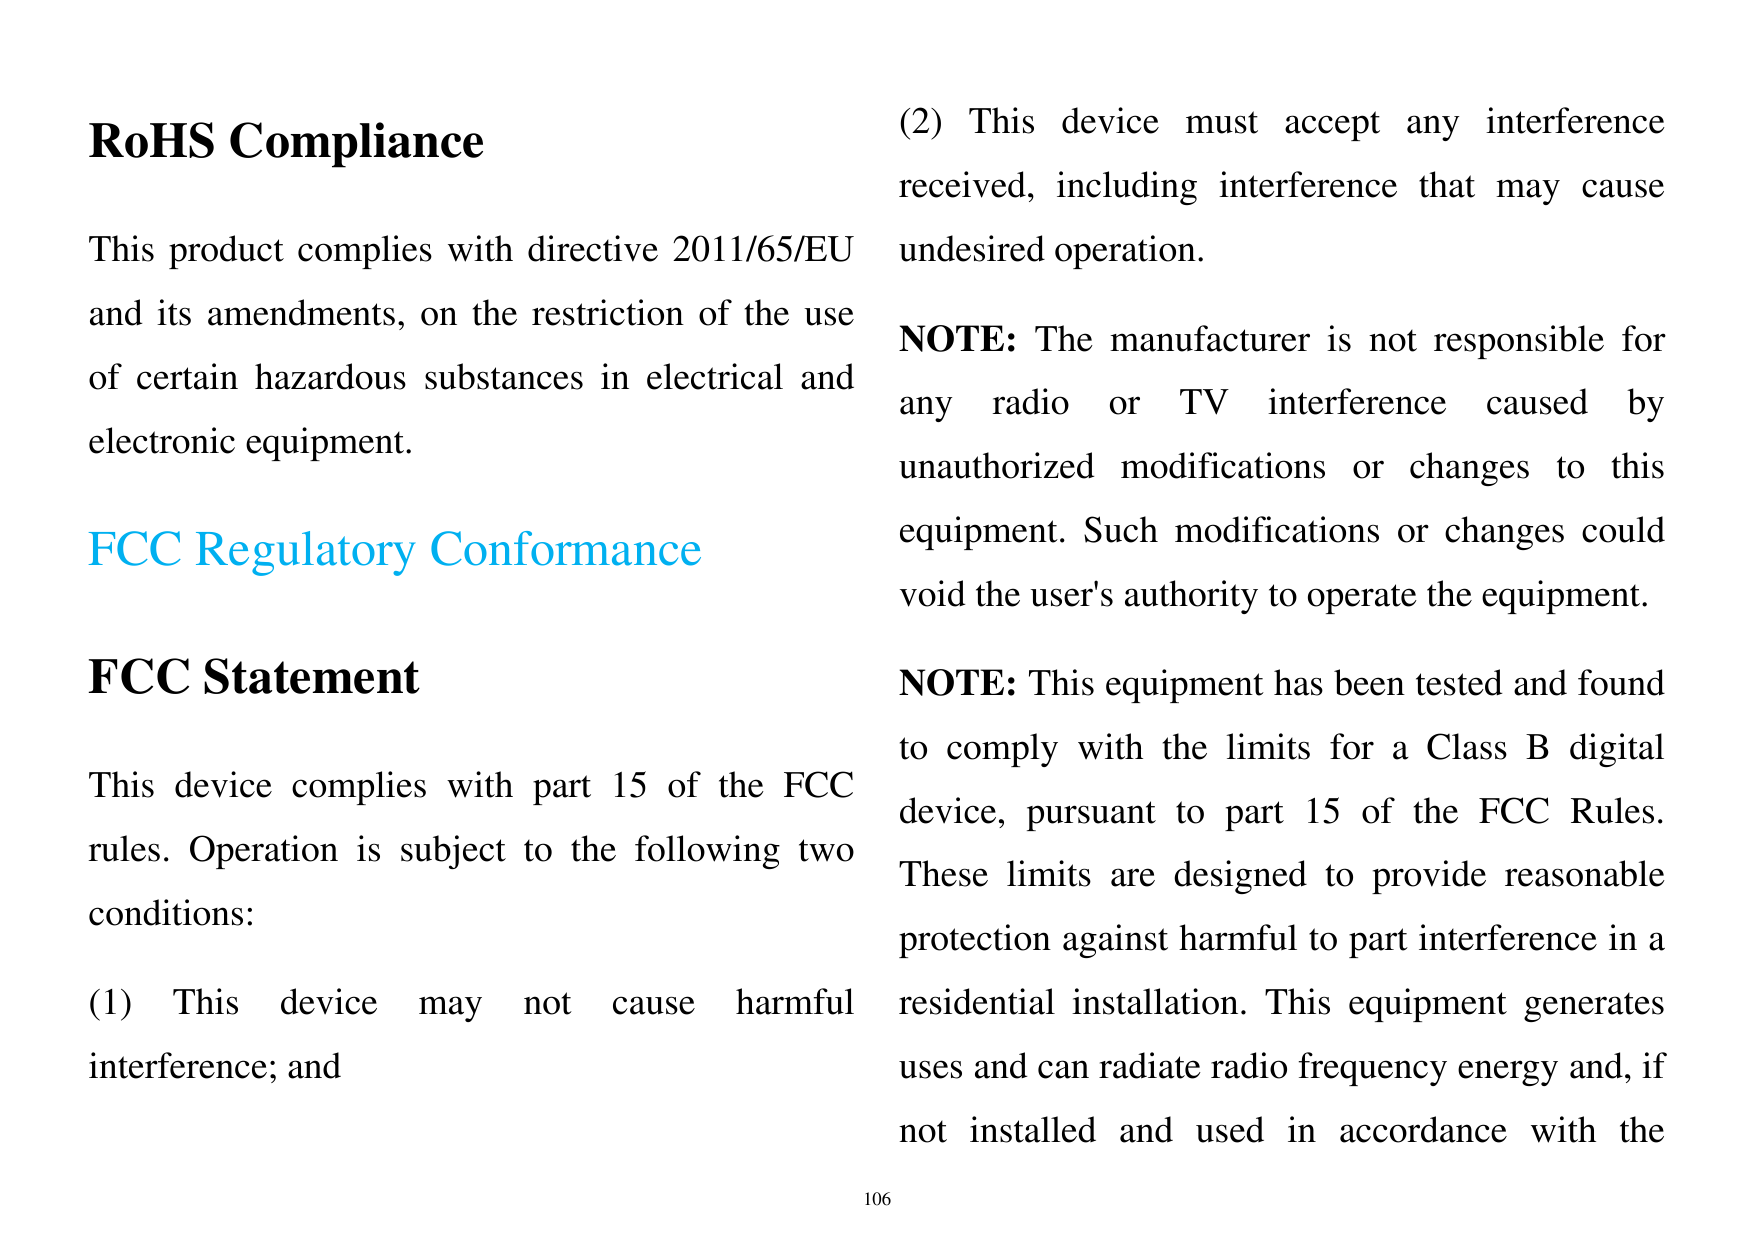 (2) This device must accept any interferenceRoHS Compliancereceived, including interference that may causeThis product complies 